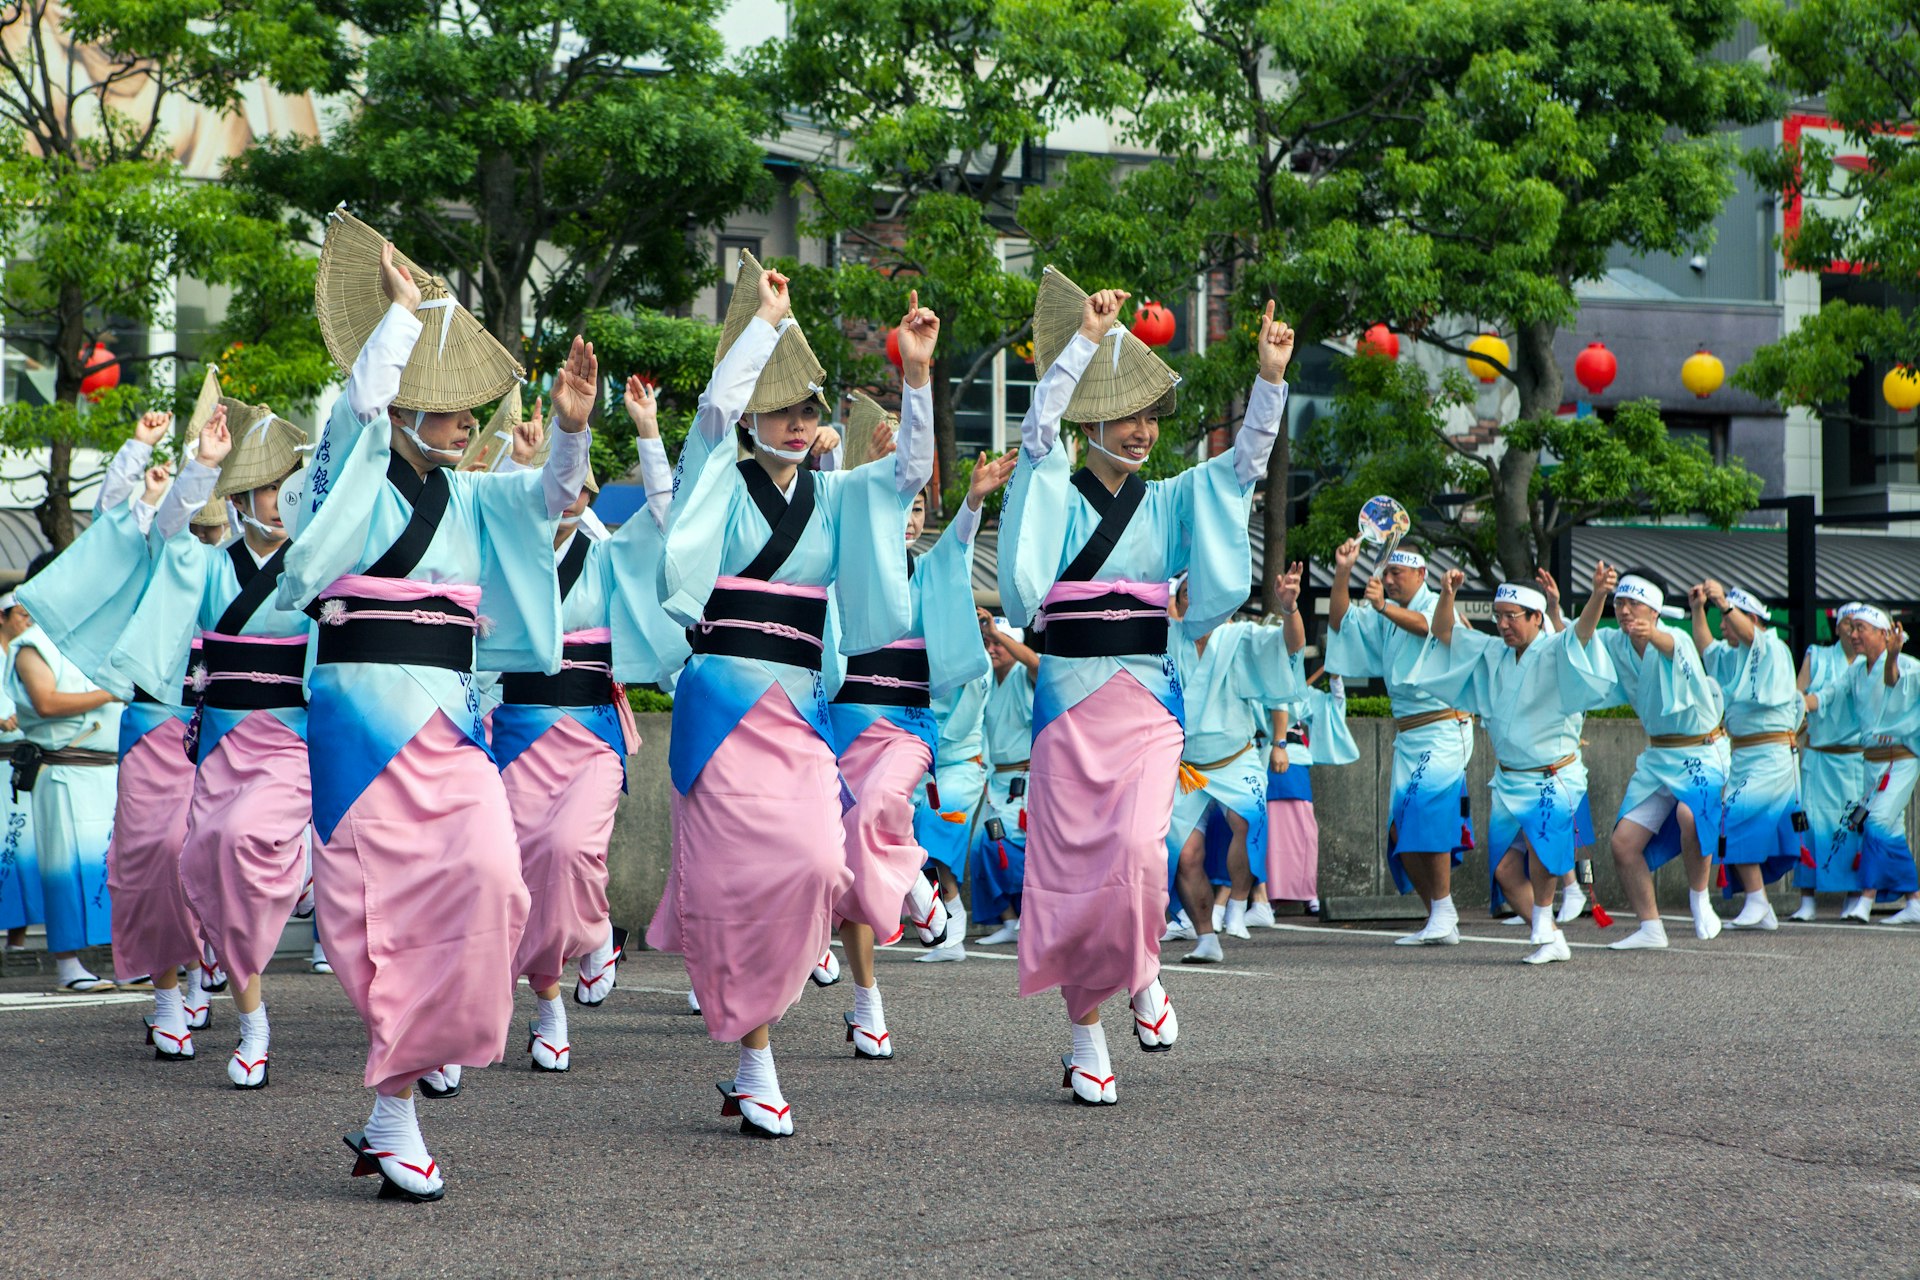 A group performing a traditional Japanese dance at the Obon festival in Tokushima